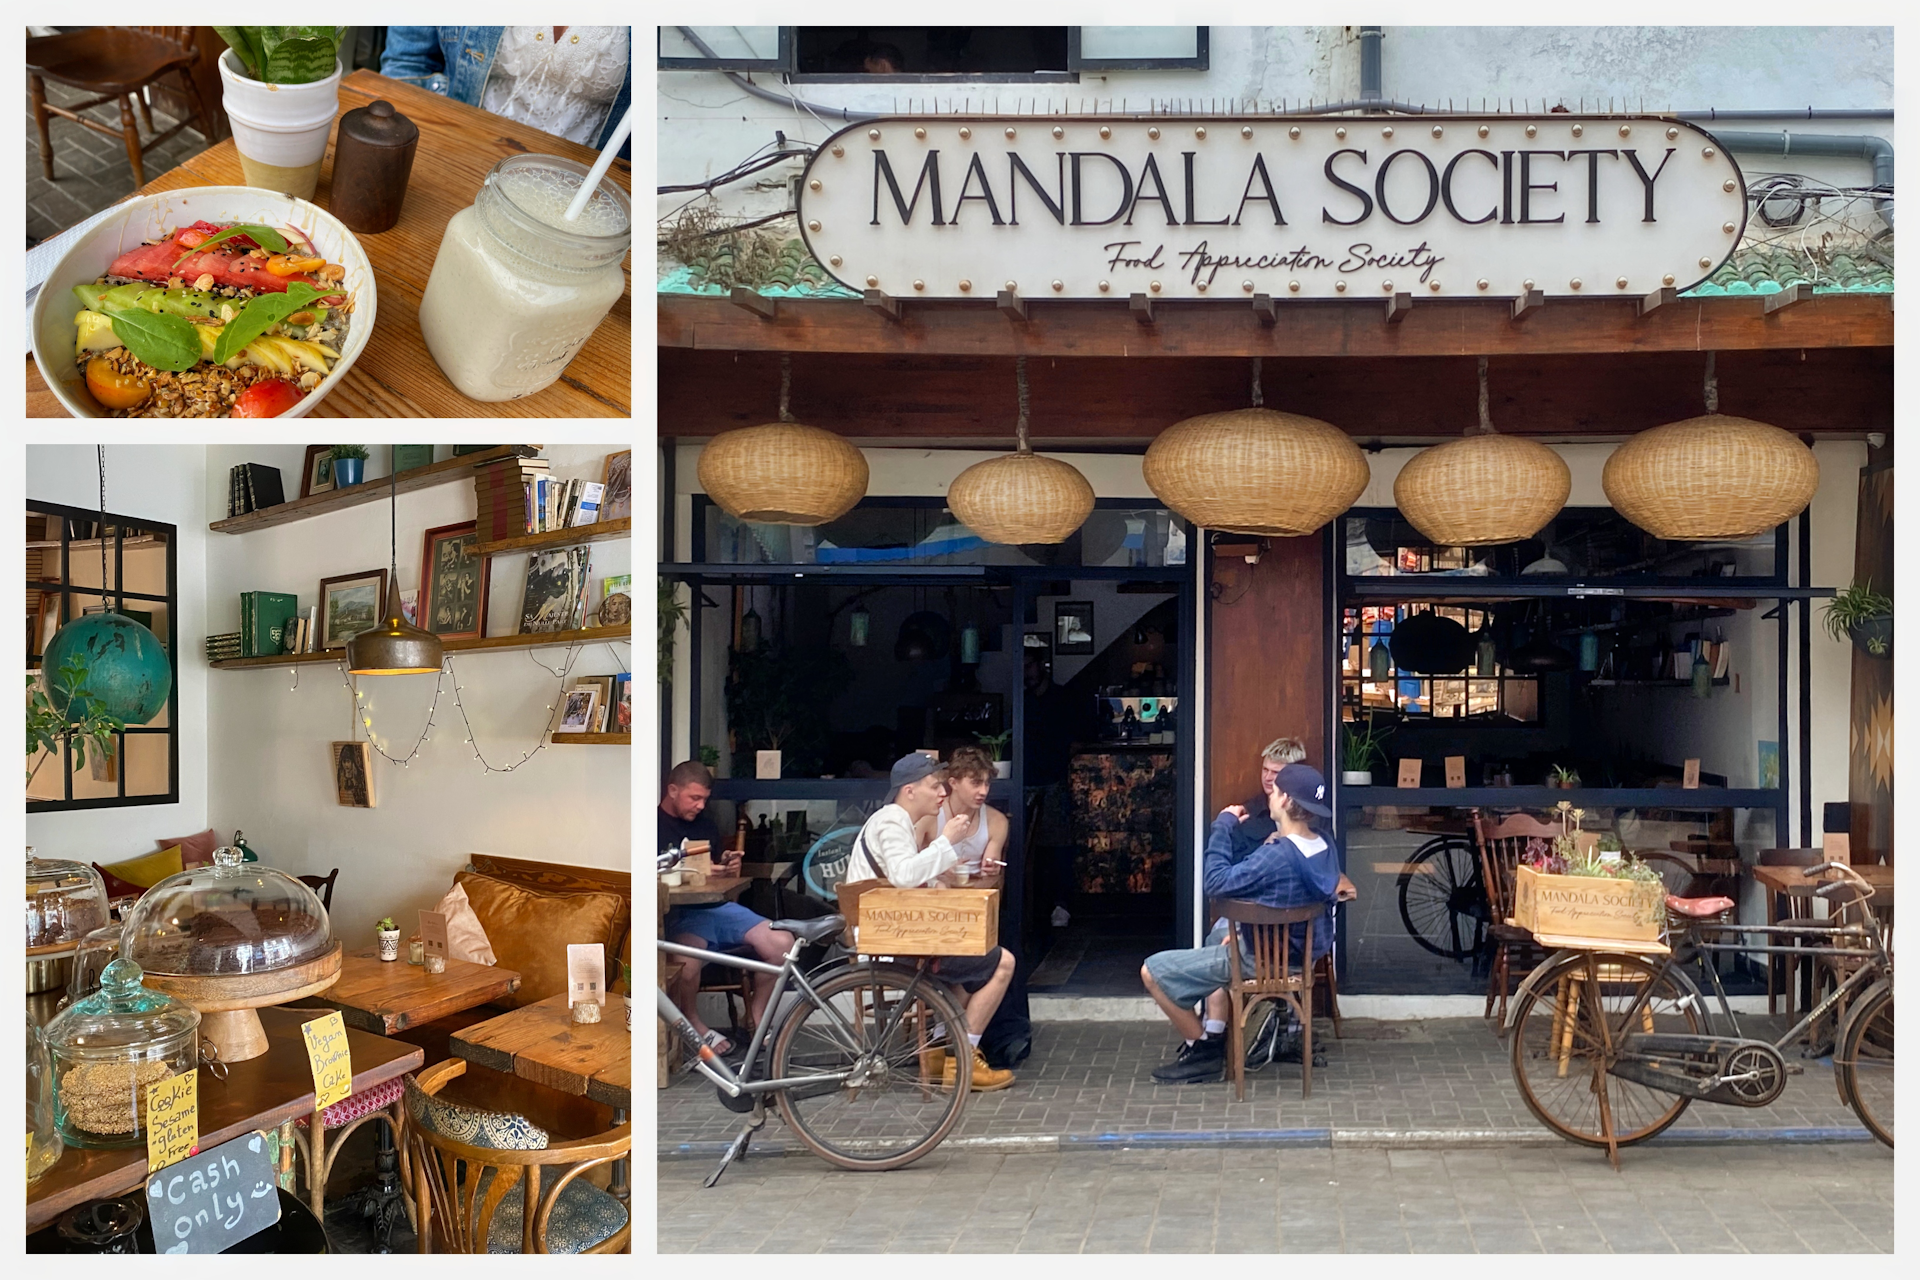 Exterior and interior shots from Mandala Society, a breakfast and brunch spot in Essaouira